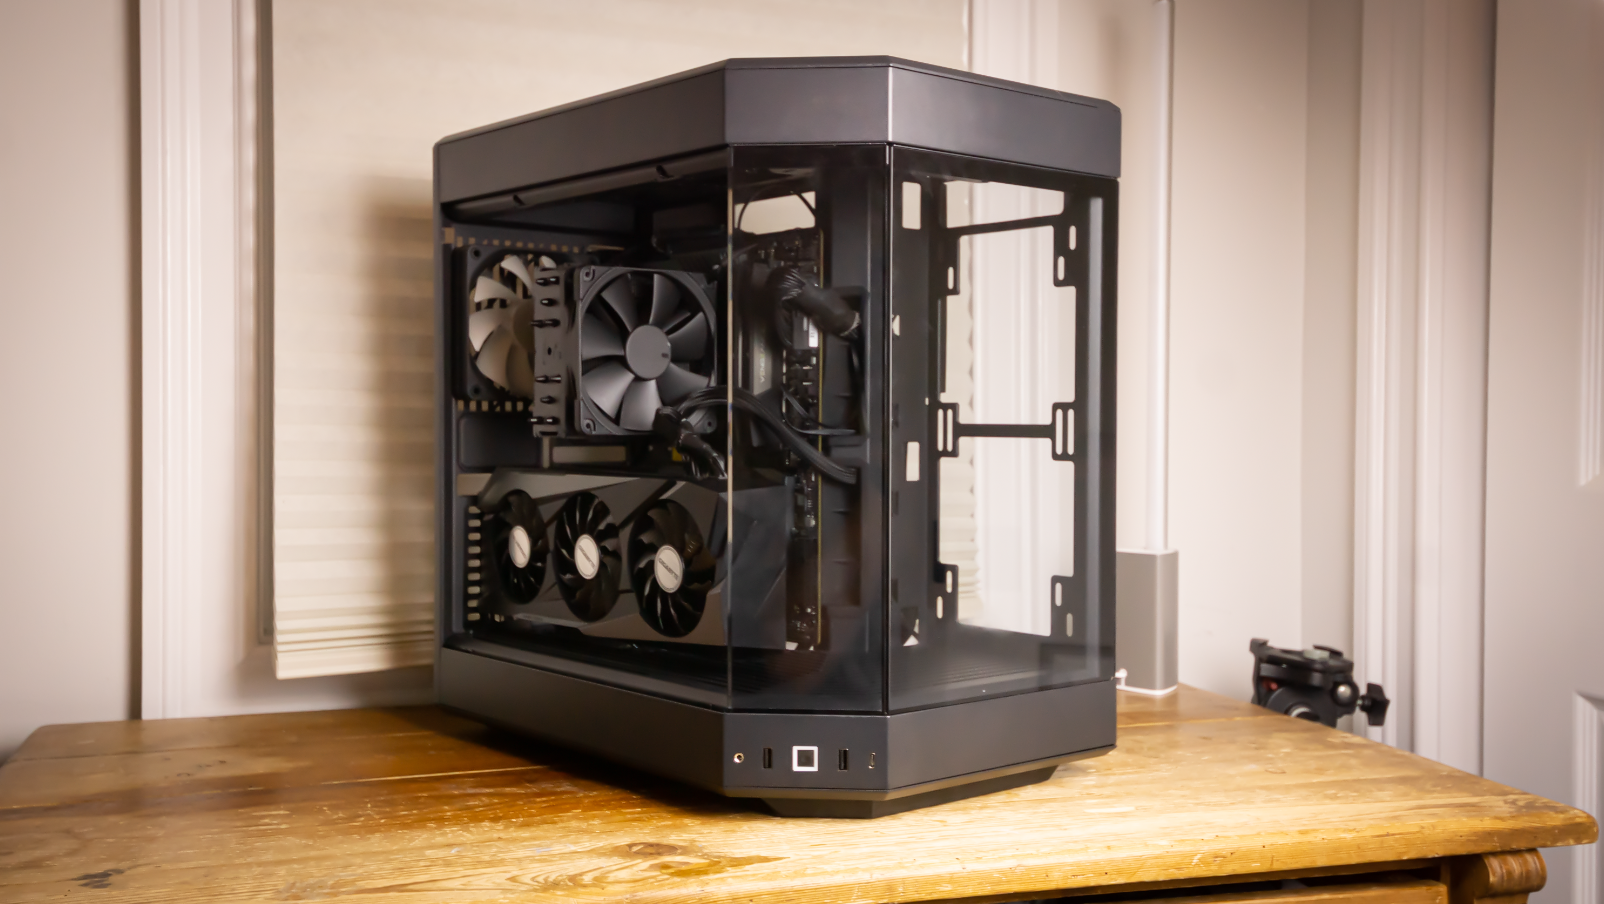 HYTE Y40 Modern Aesthetic Panoramic Tempered Glass Mid-Tower ATX